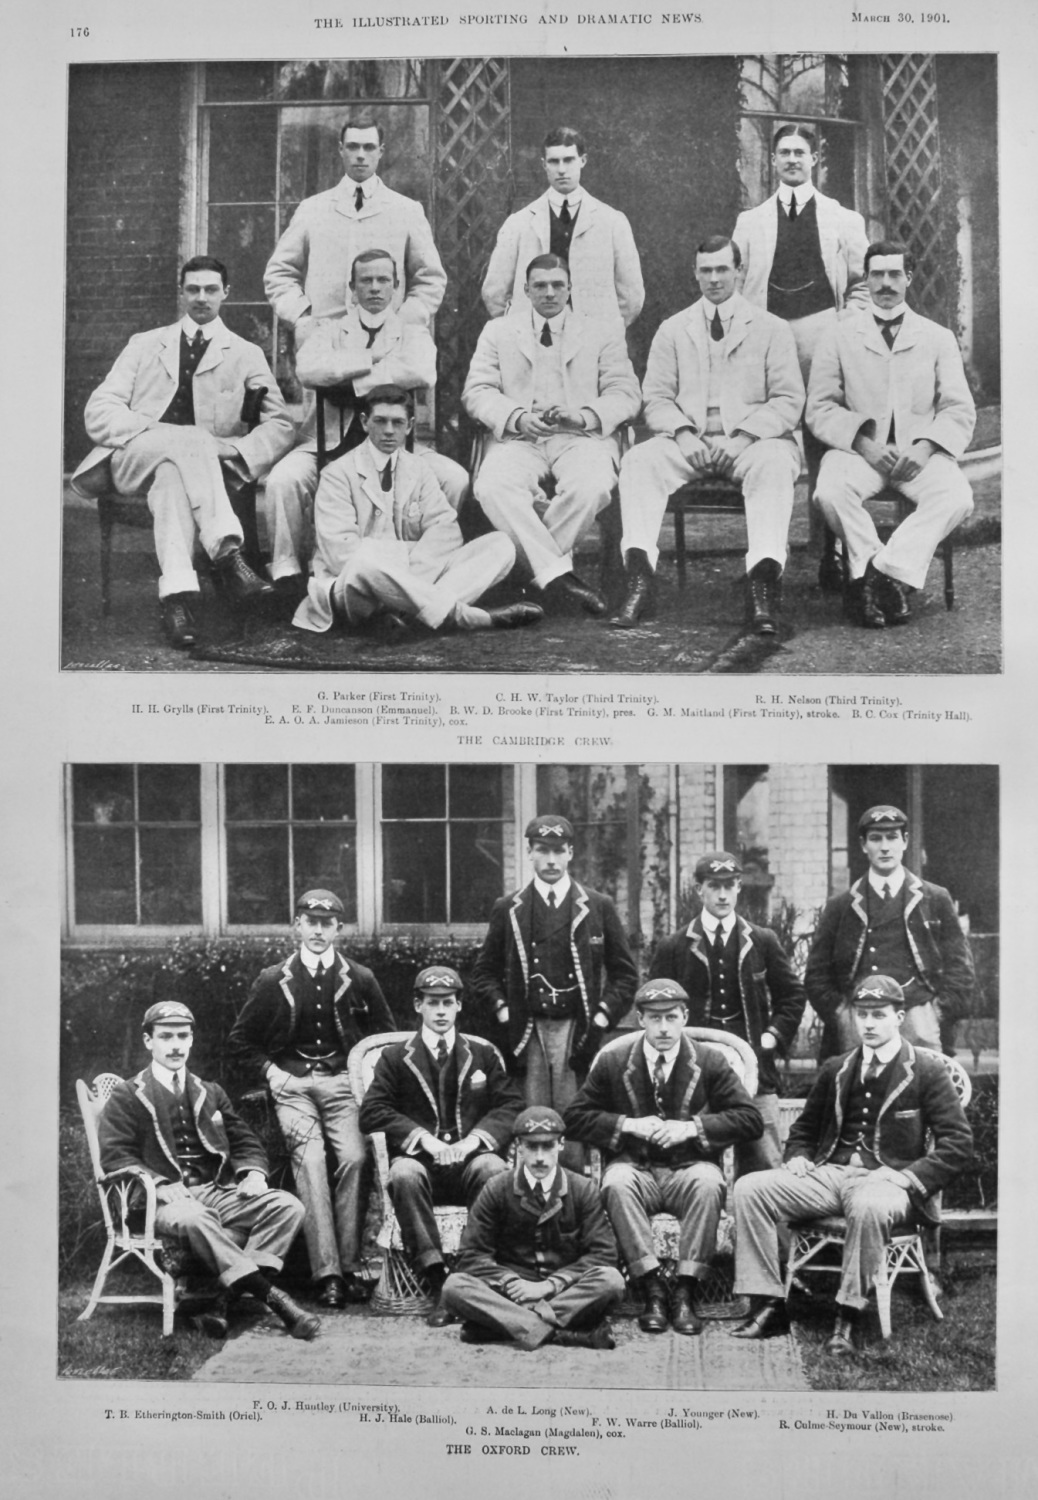 The University Boat Race.   The Cambridge Crew and The Oxford Crew.  1901.